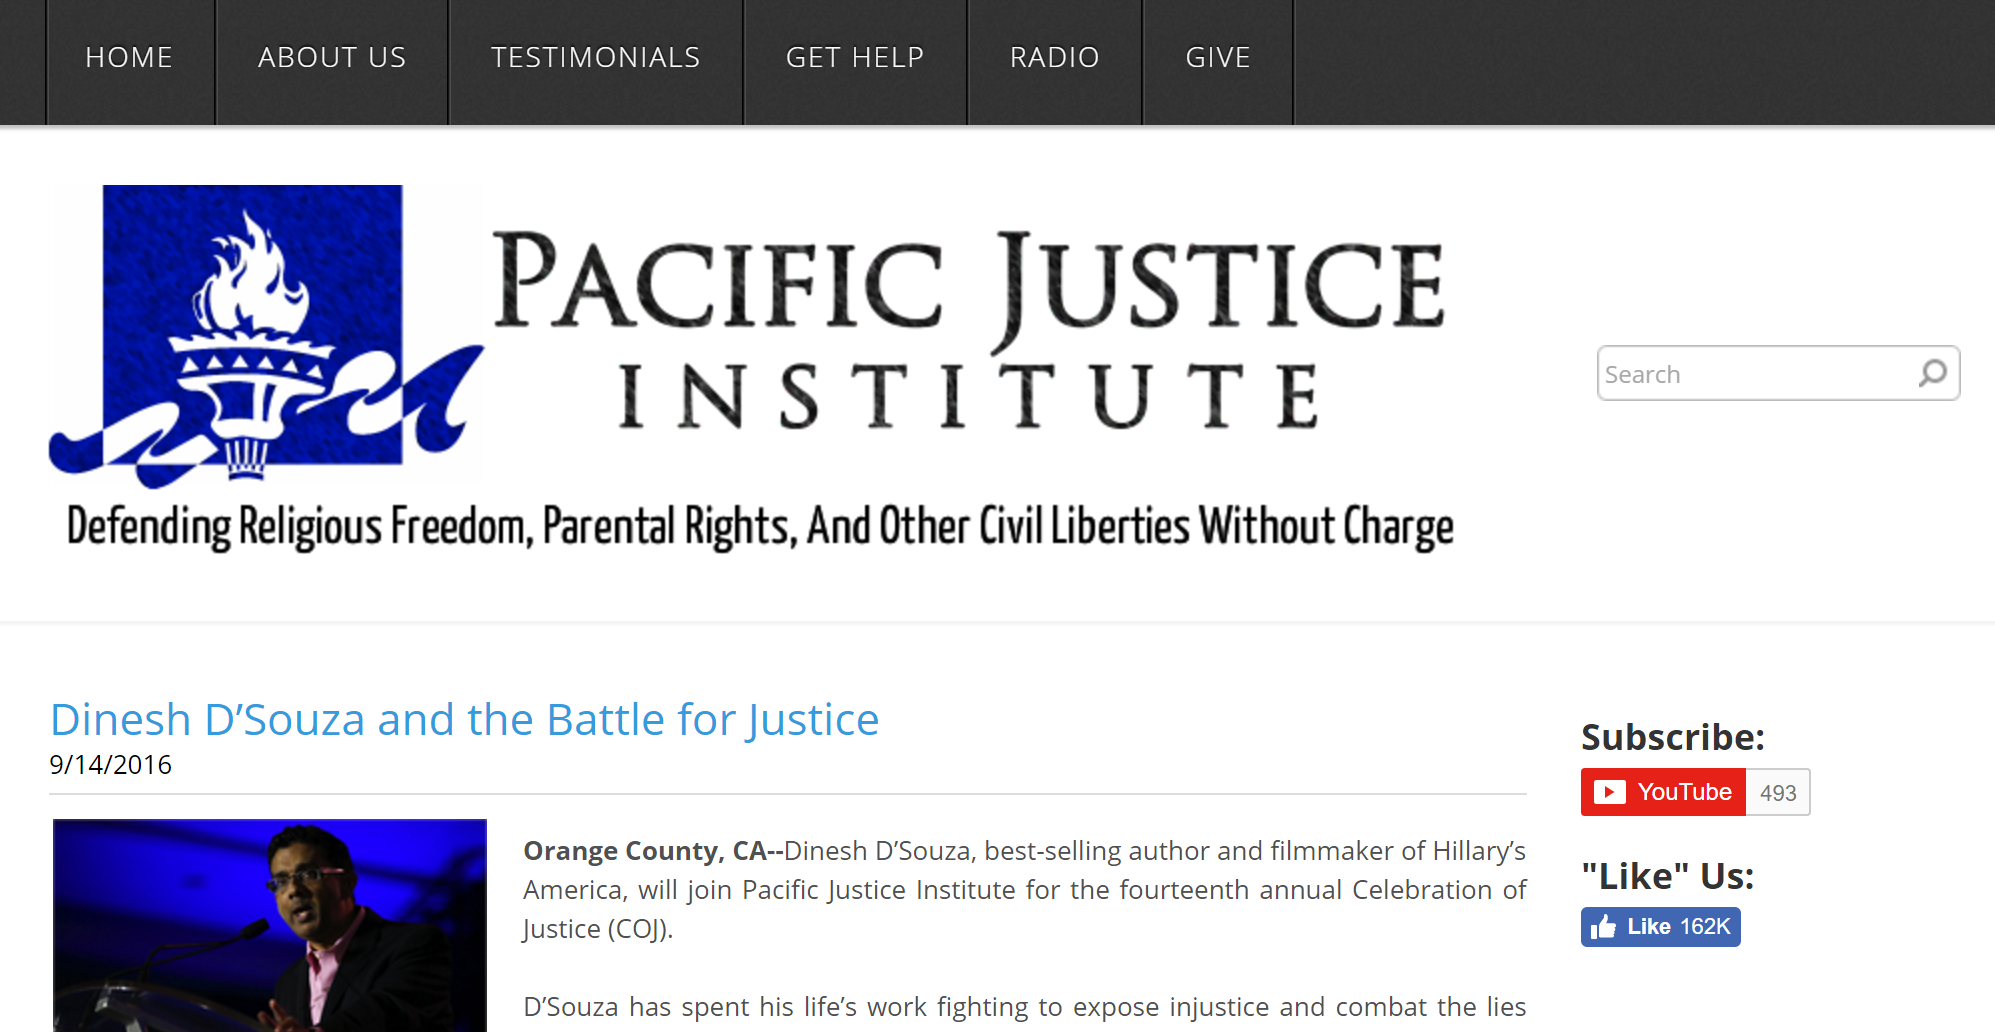 The homepage of the Pacific Justice Institute.